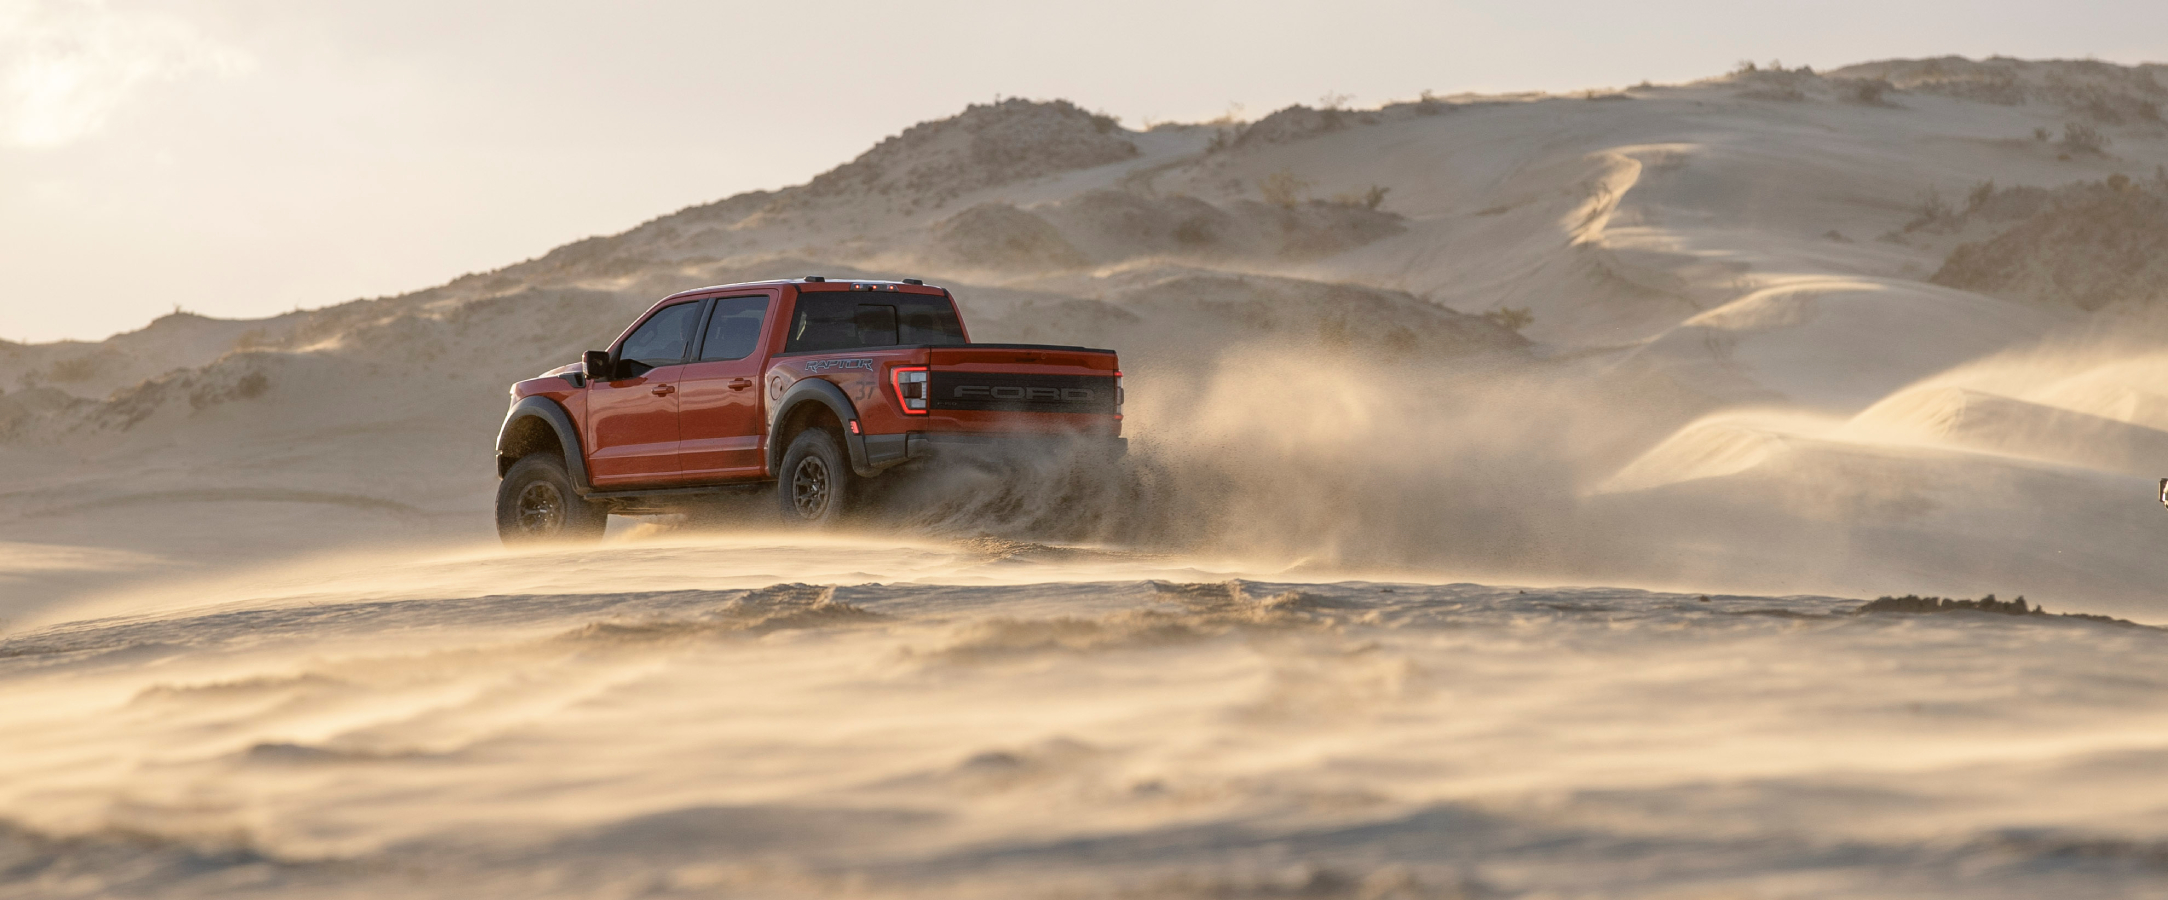 The 2023 Ford F-150 Raptor R pickup truck will be available for order